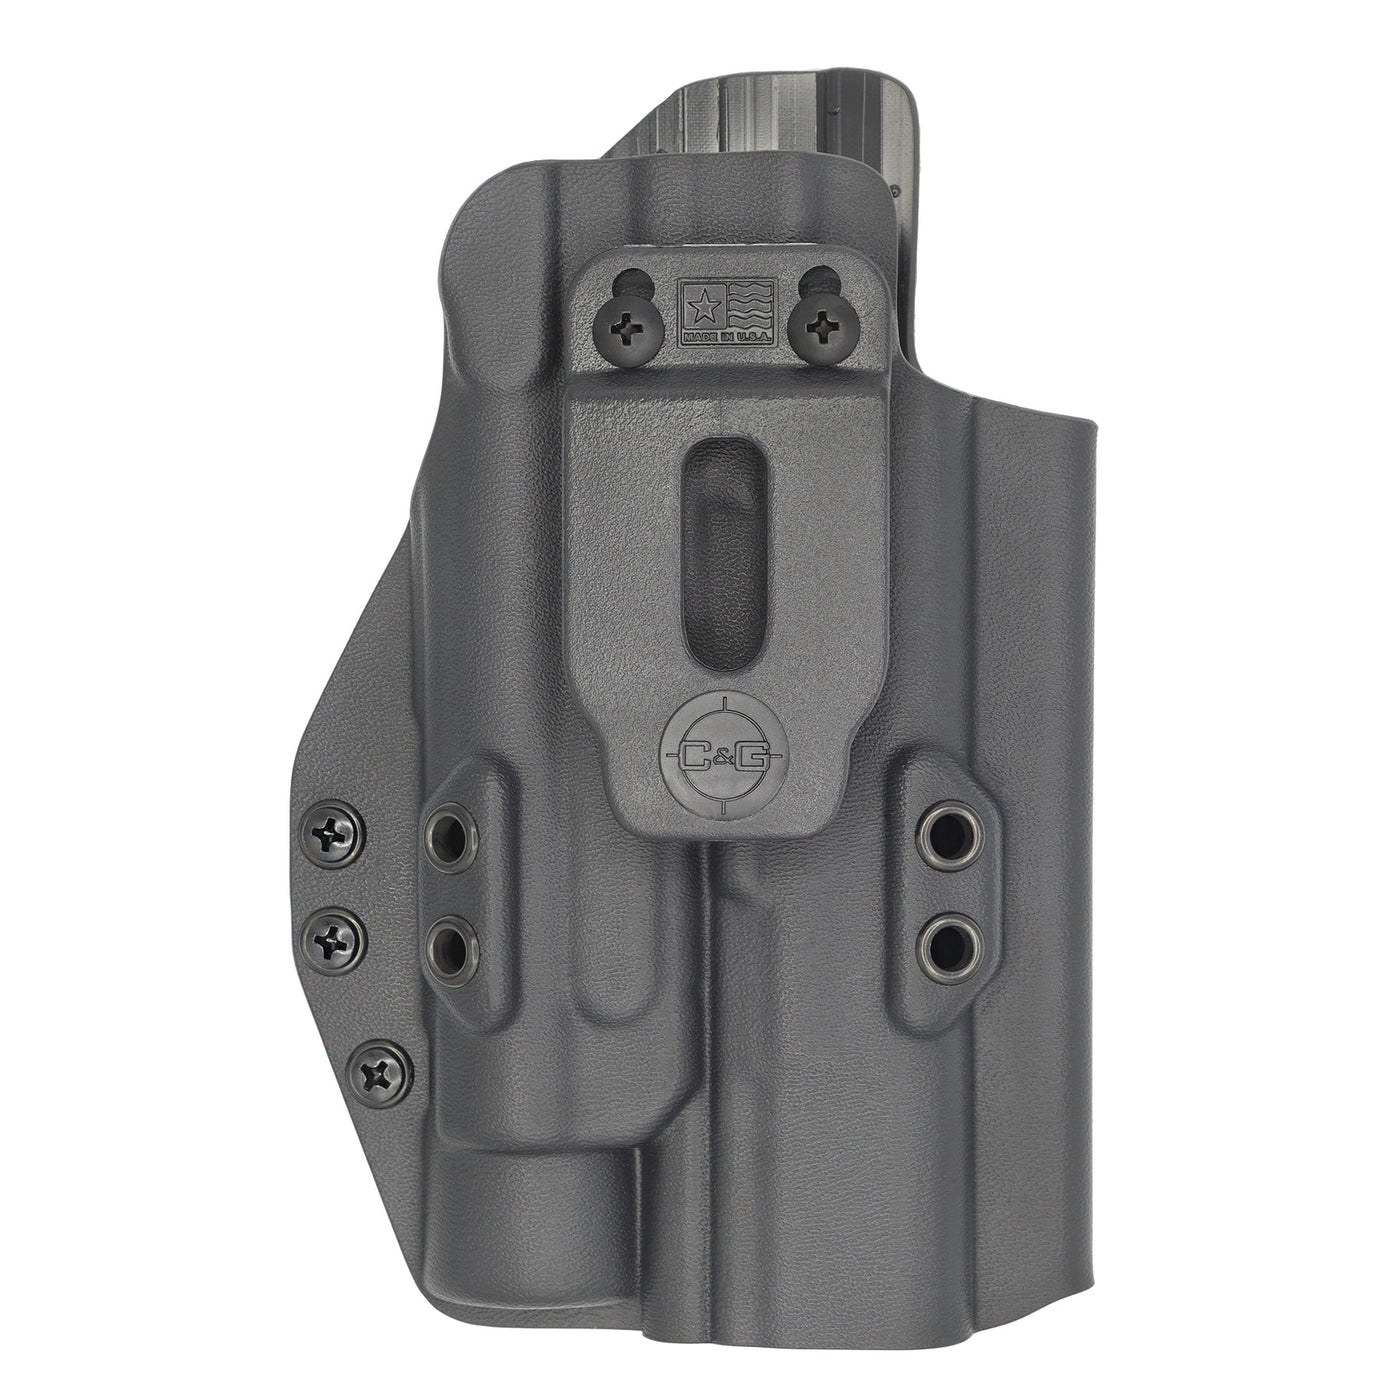 C&G Holsters Quickship IWB Tactical FN 509 Streamlight TLR1